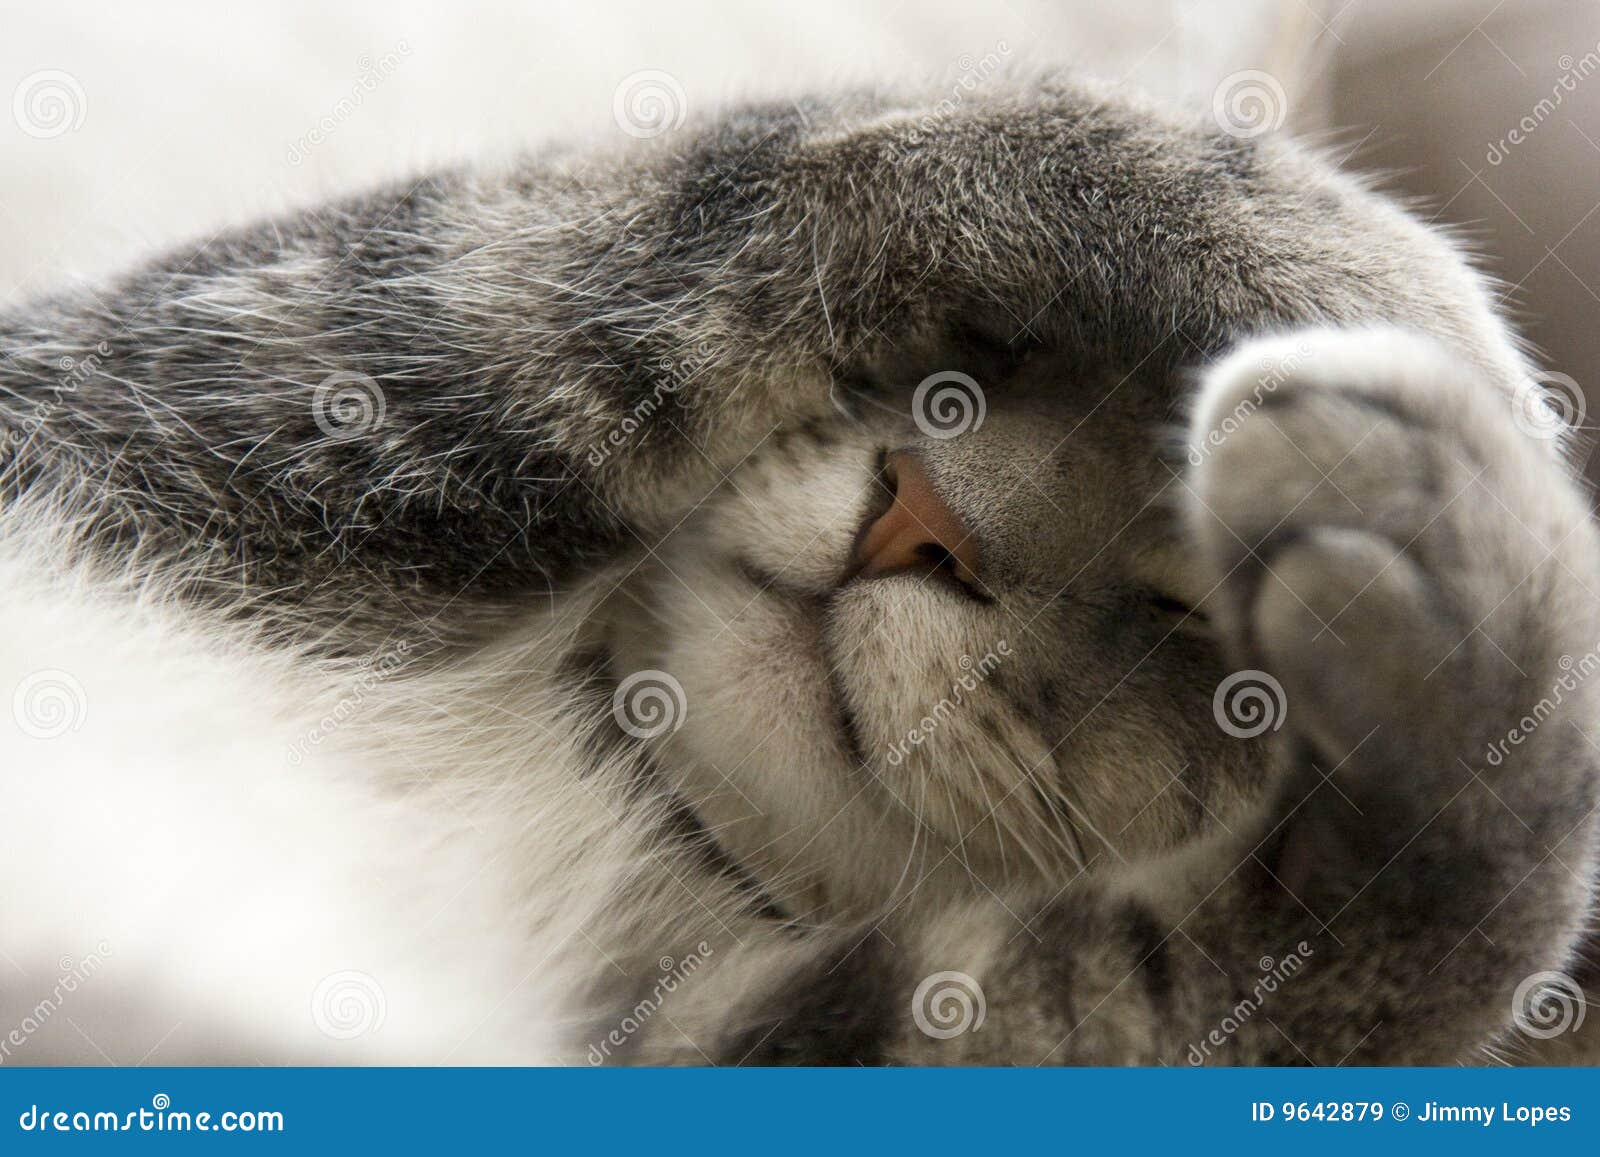 shy cat with paws over face